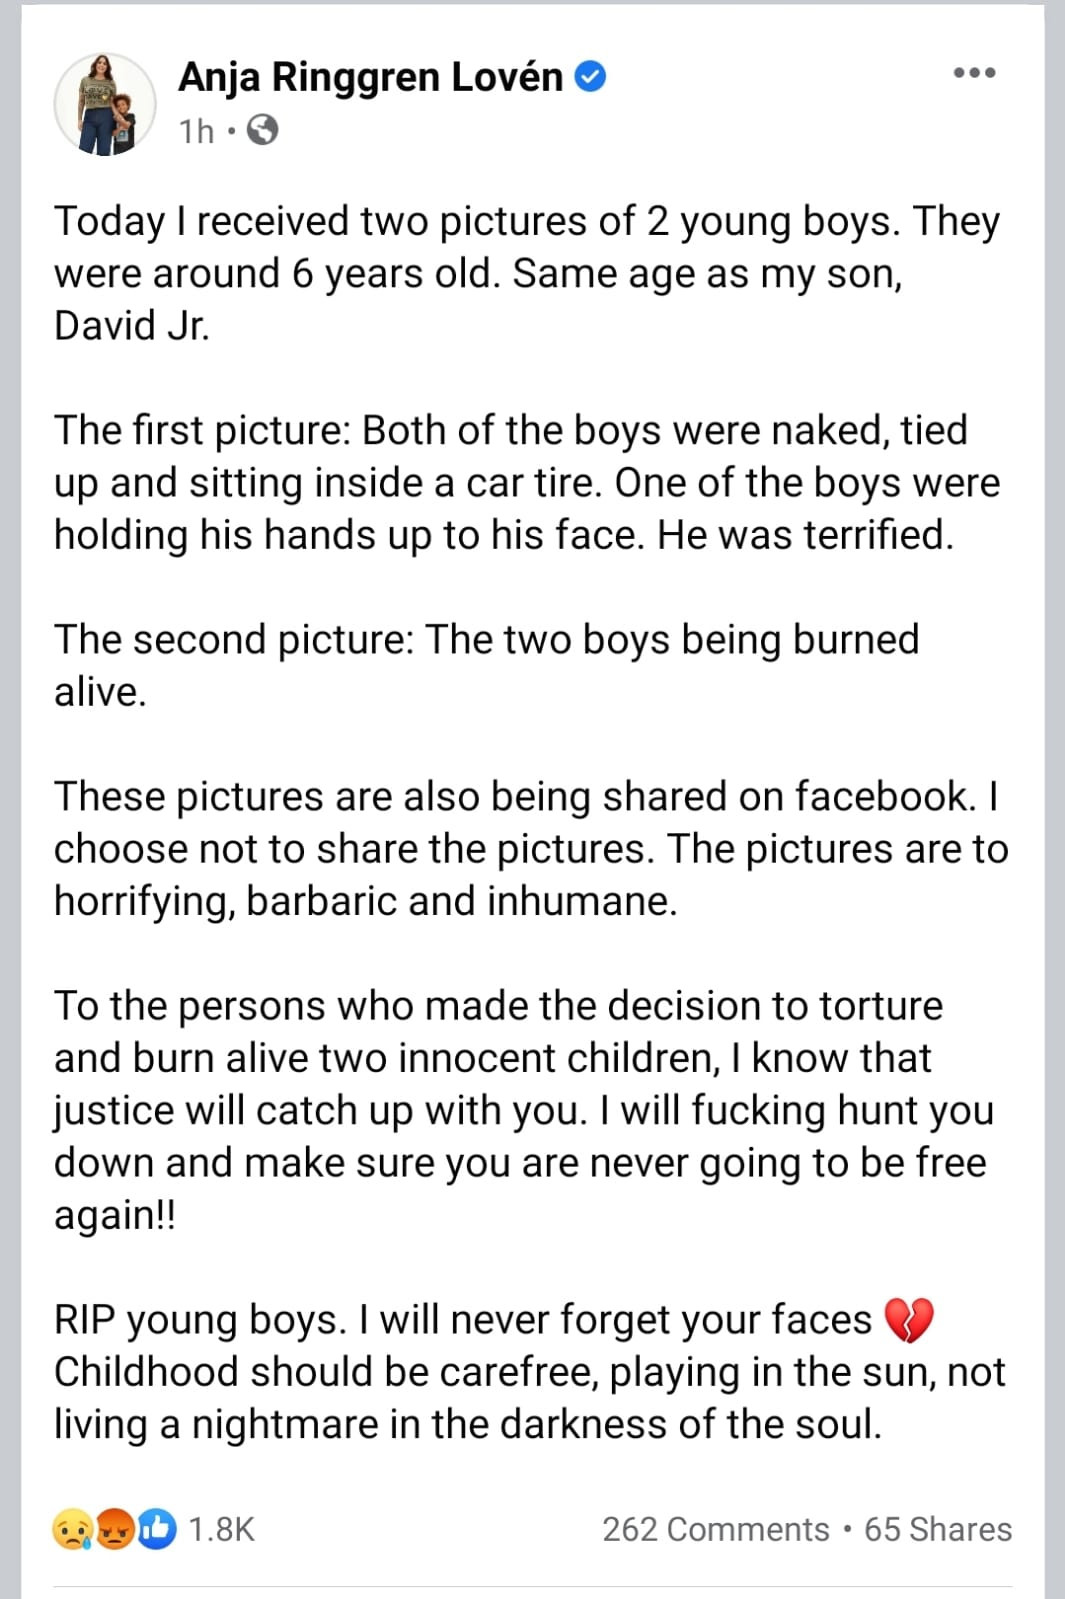 Two boys allegedly burnt to death after being accused of stealing phones in Kenya